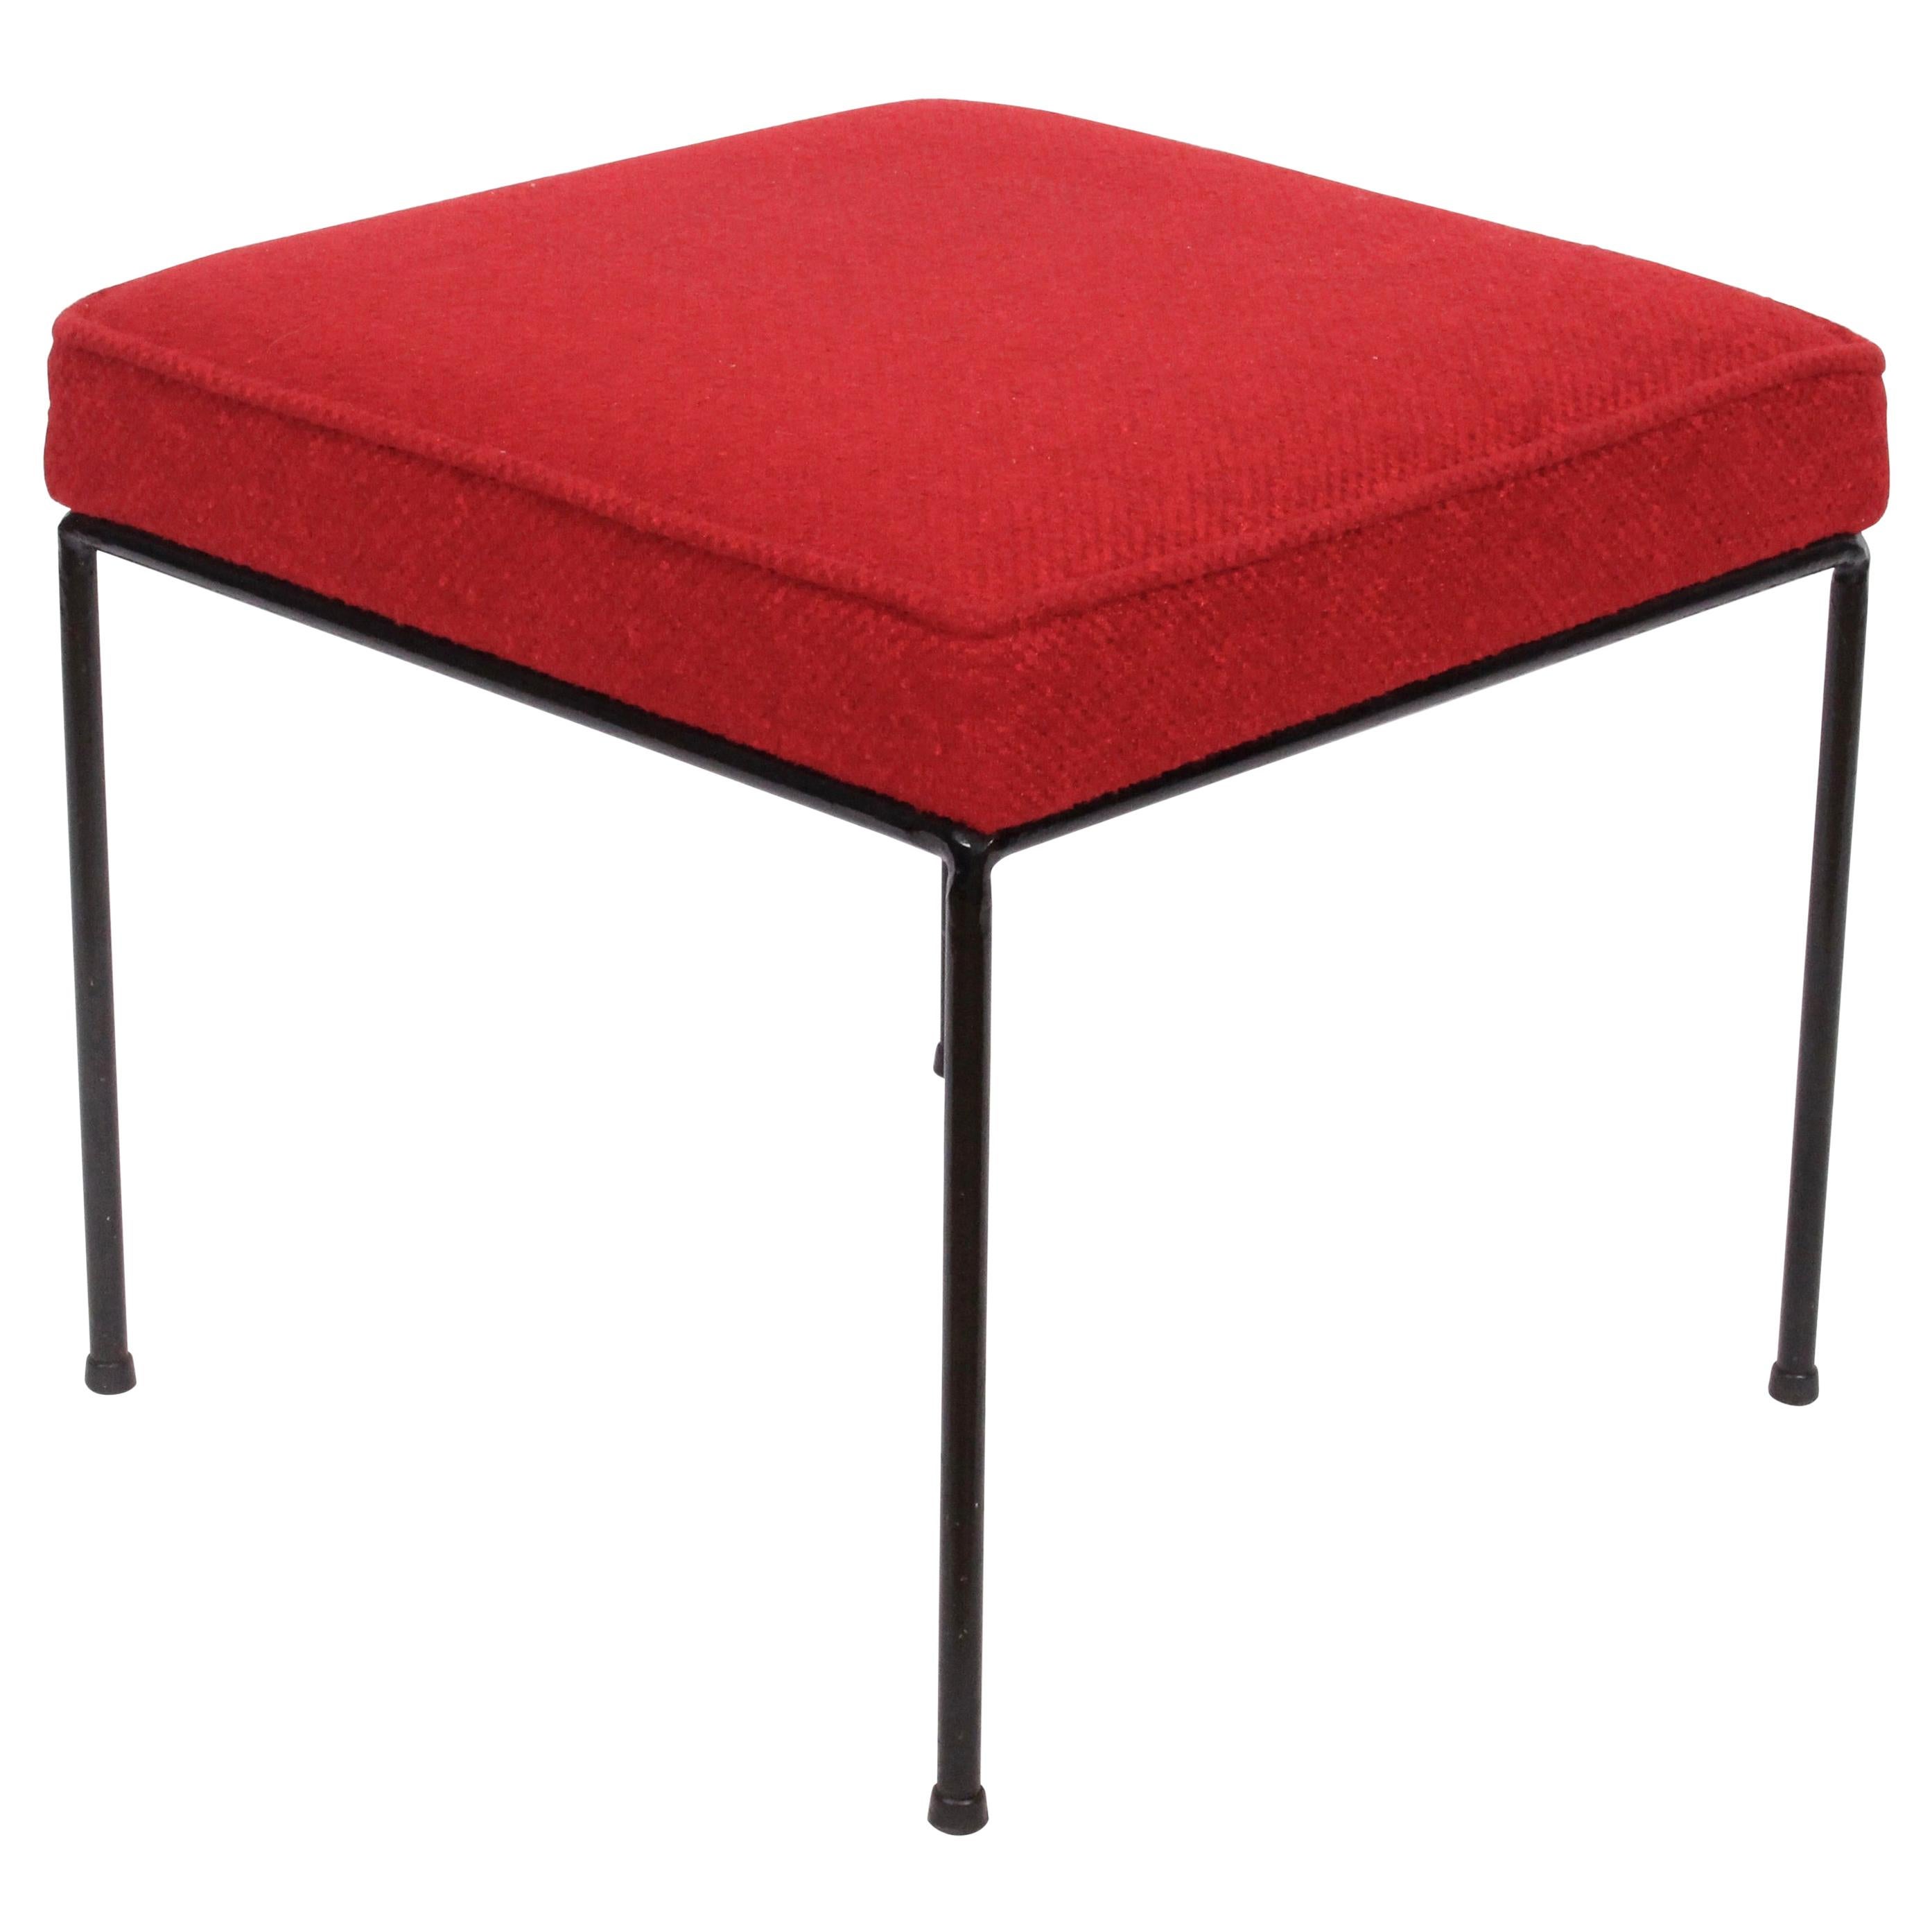 Frederick Weinberg Black Wrought Iron Stool with Red Fabric, circa 1950